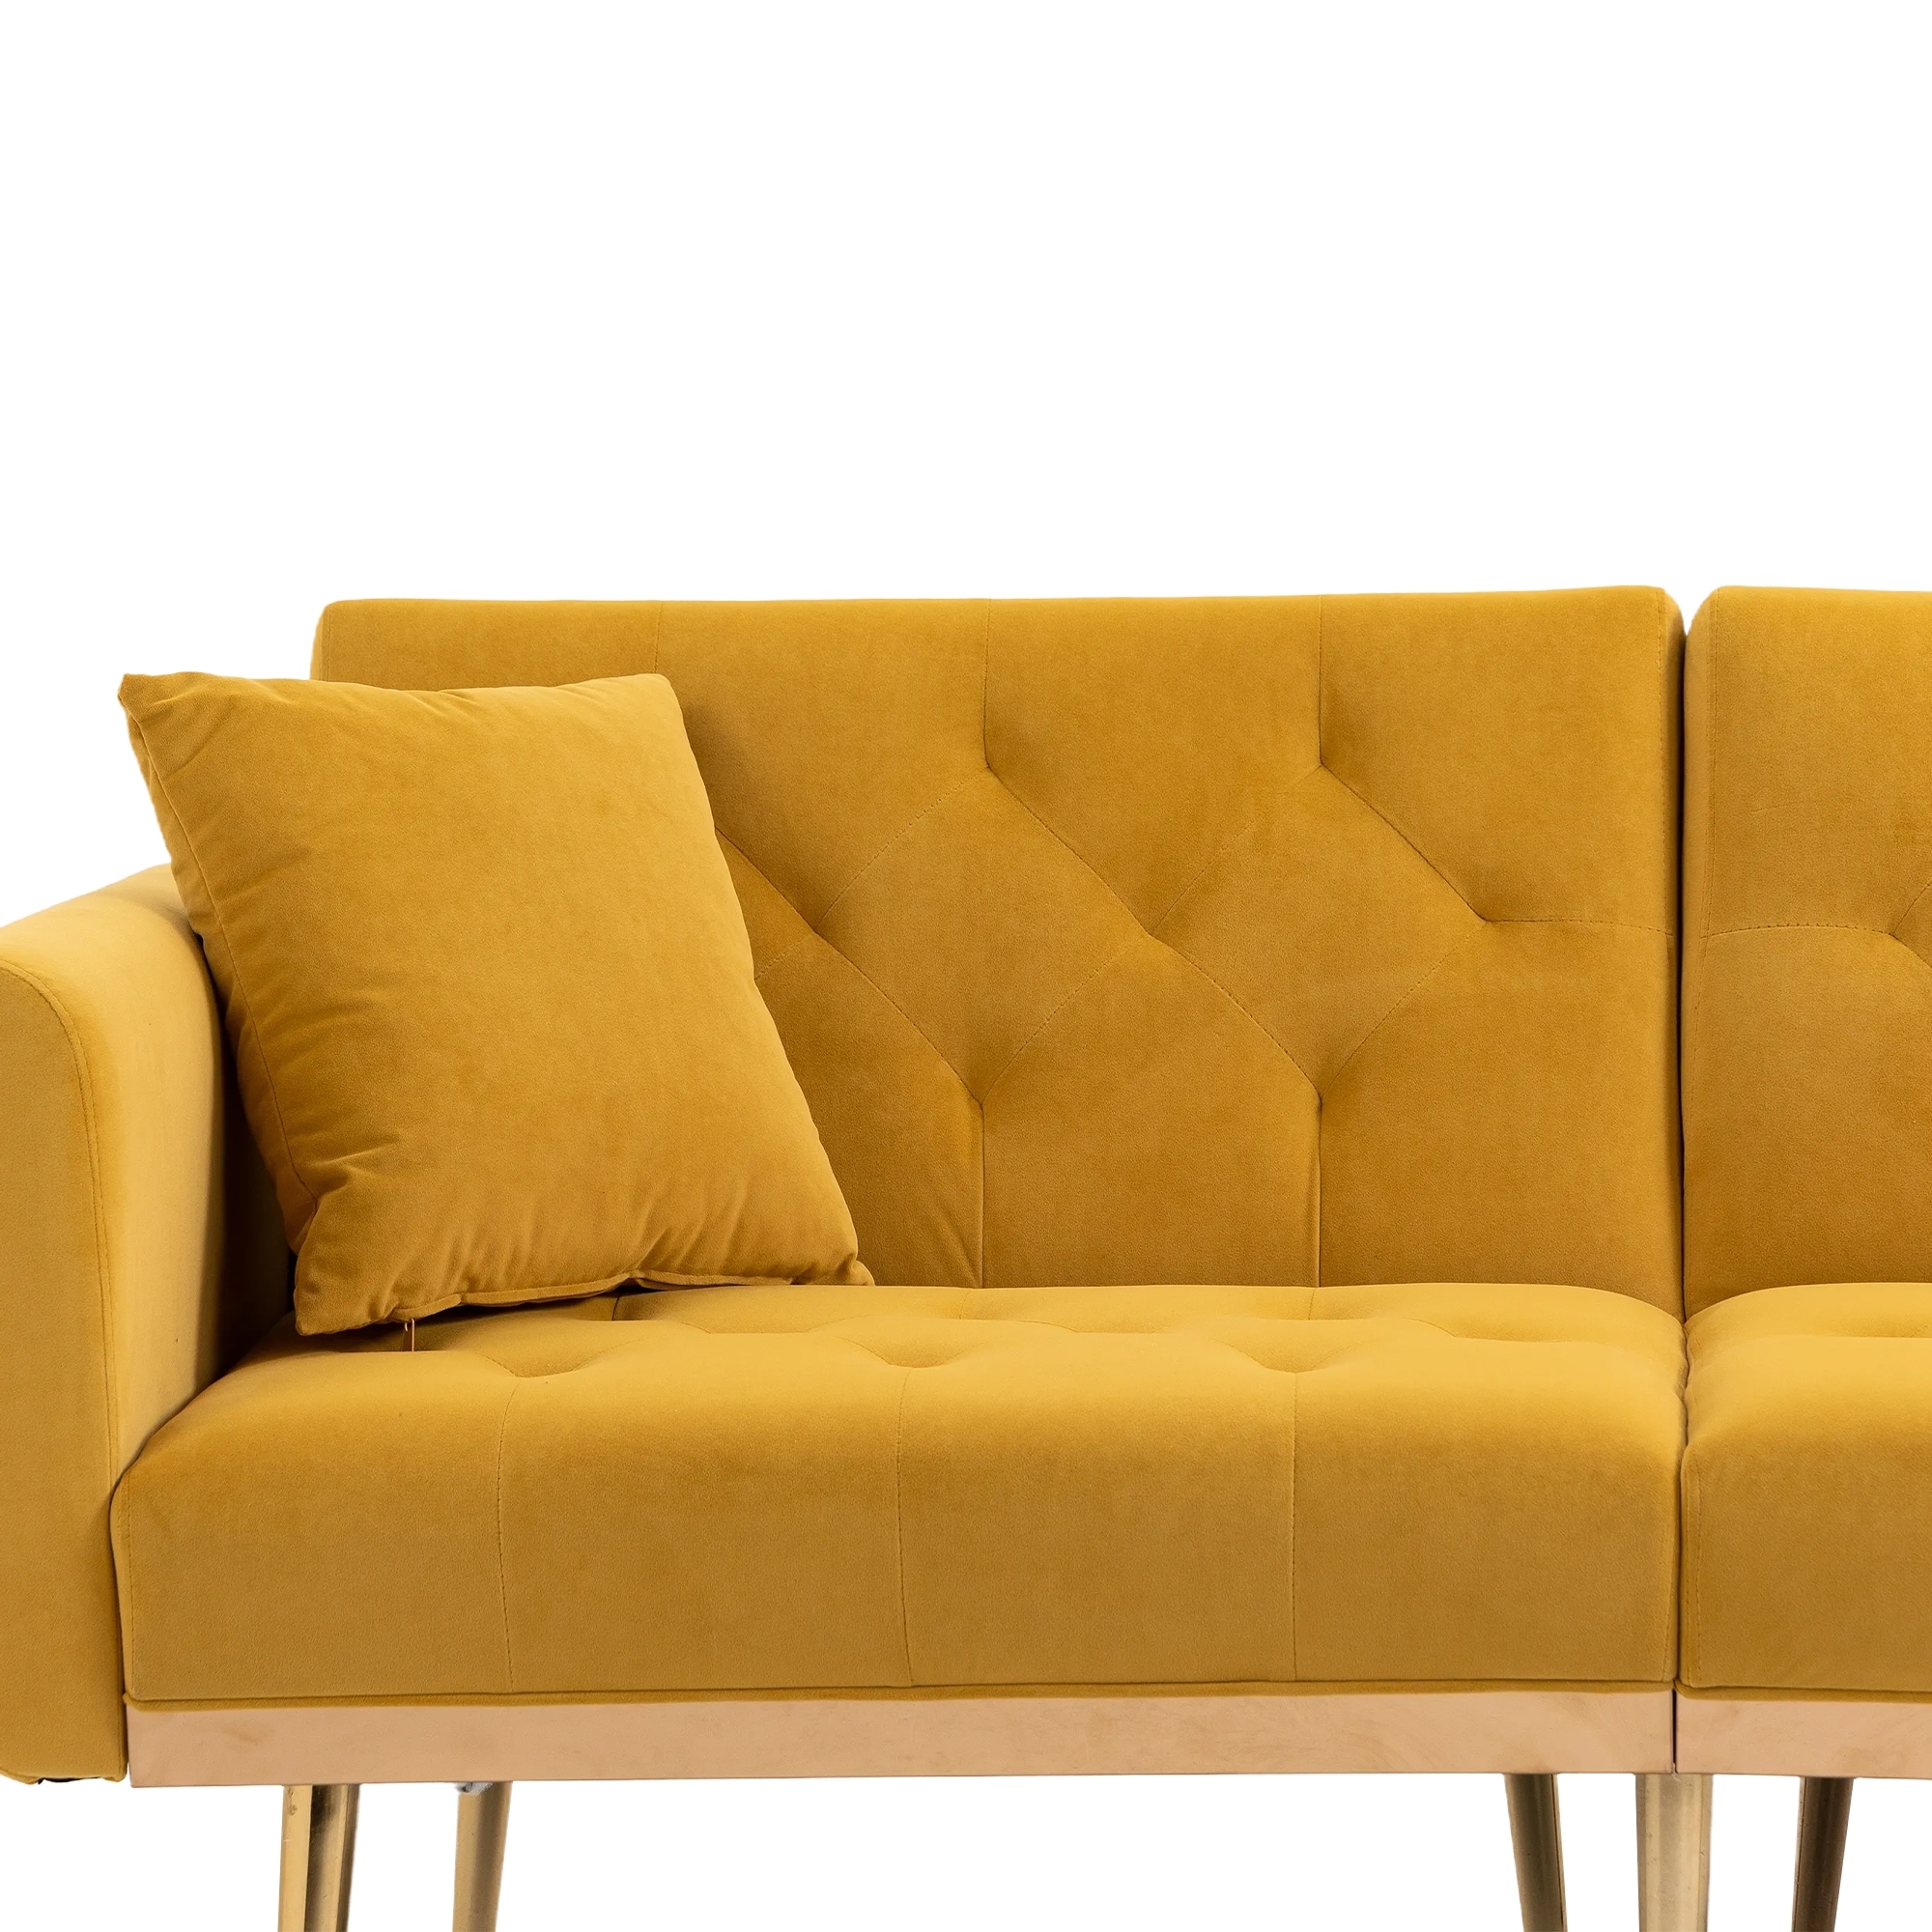 Split Sleeper Loveseat with Convertible Recliners Sofa Bed, Mustard